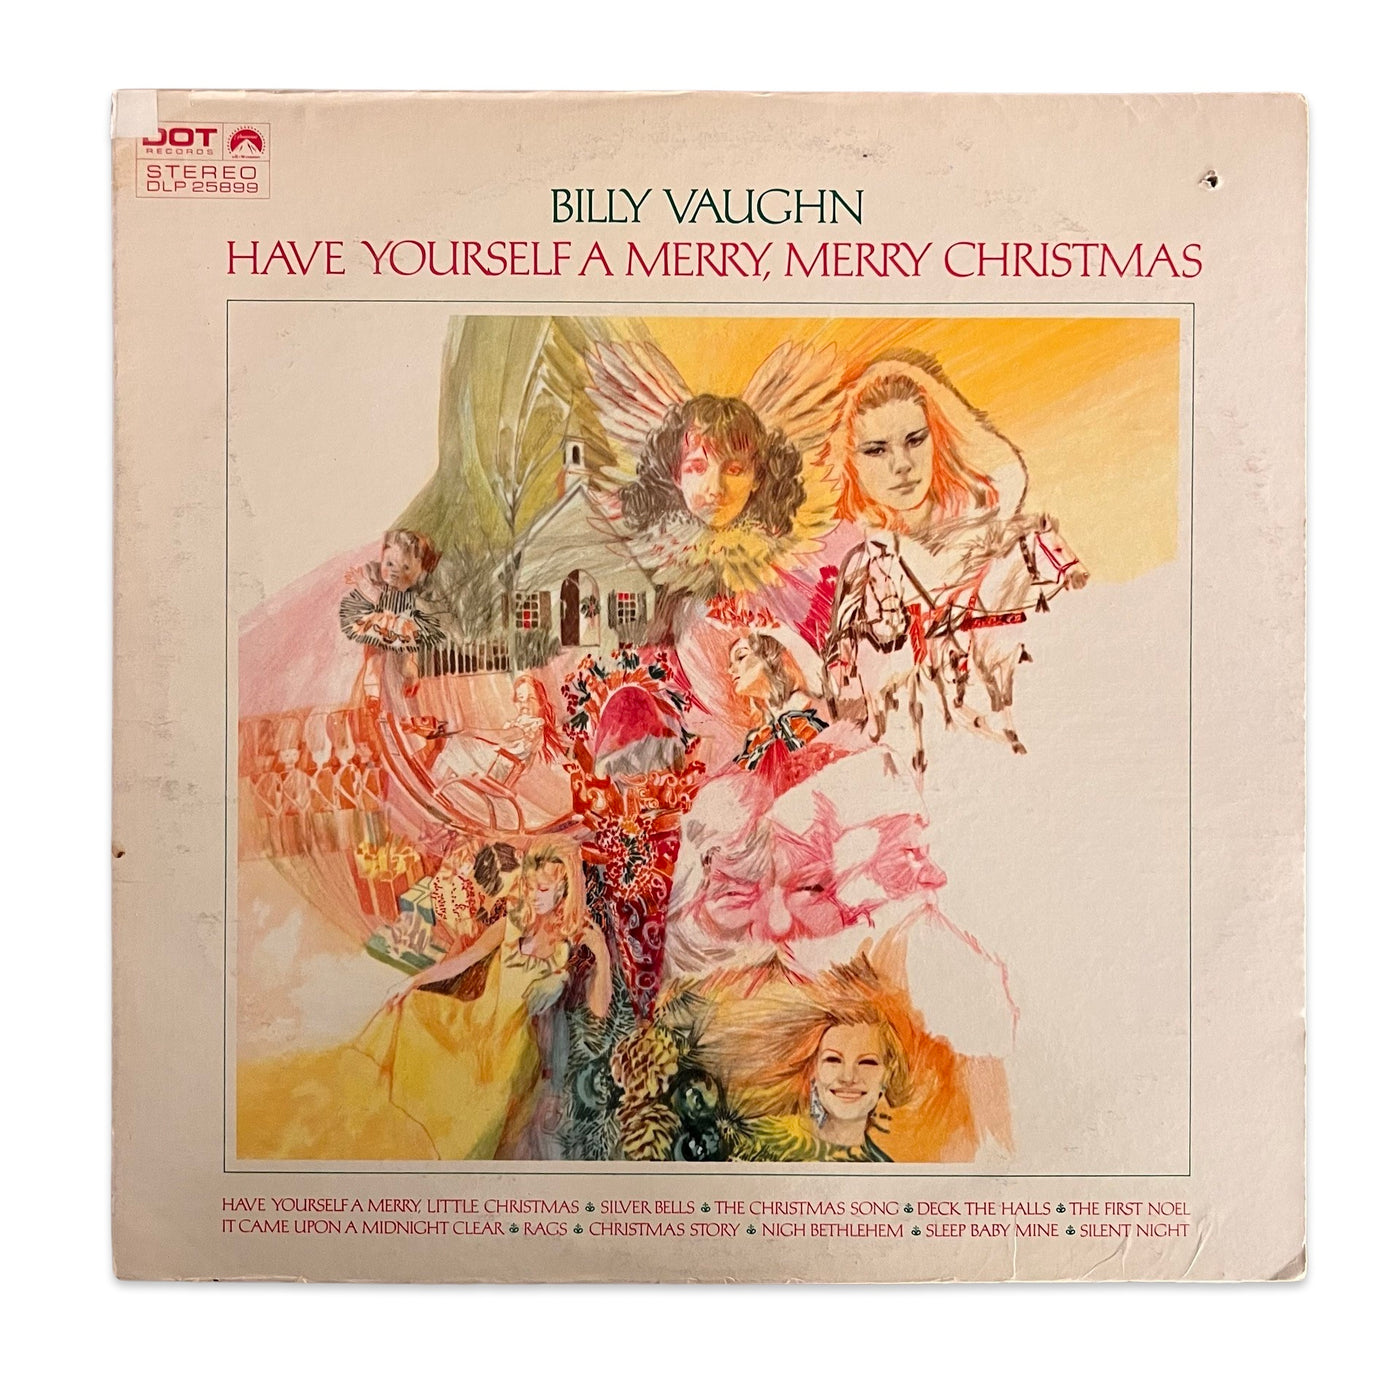 Billy Vaughn – Have Yourself A Merry, Merry Christmas (Vinyl)